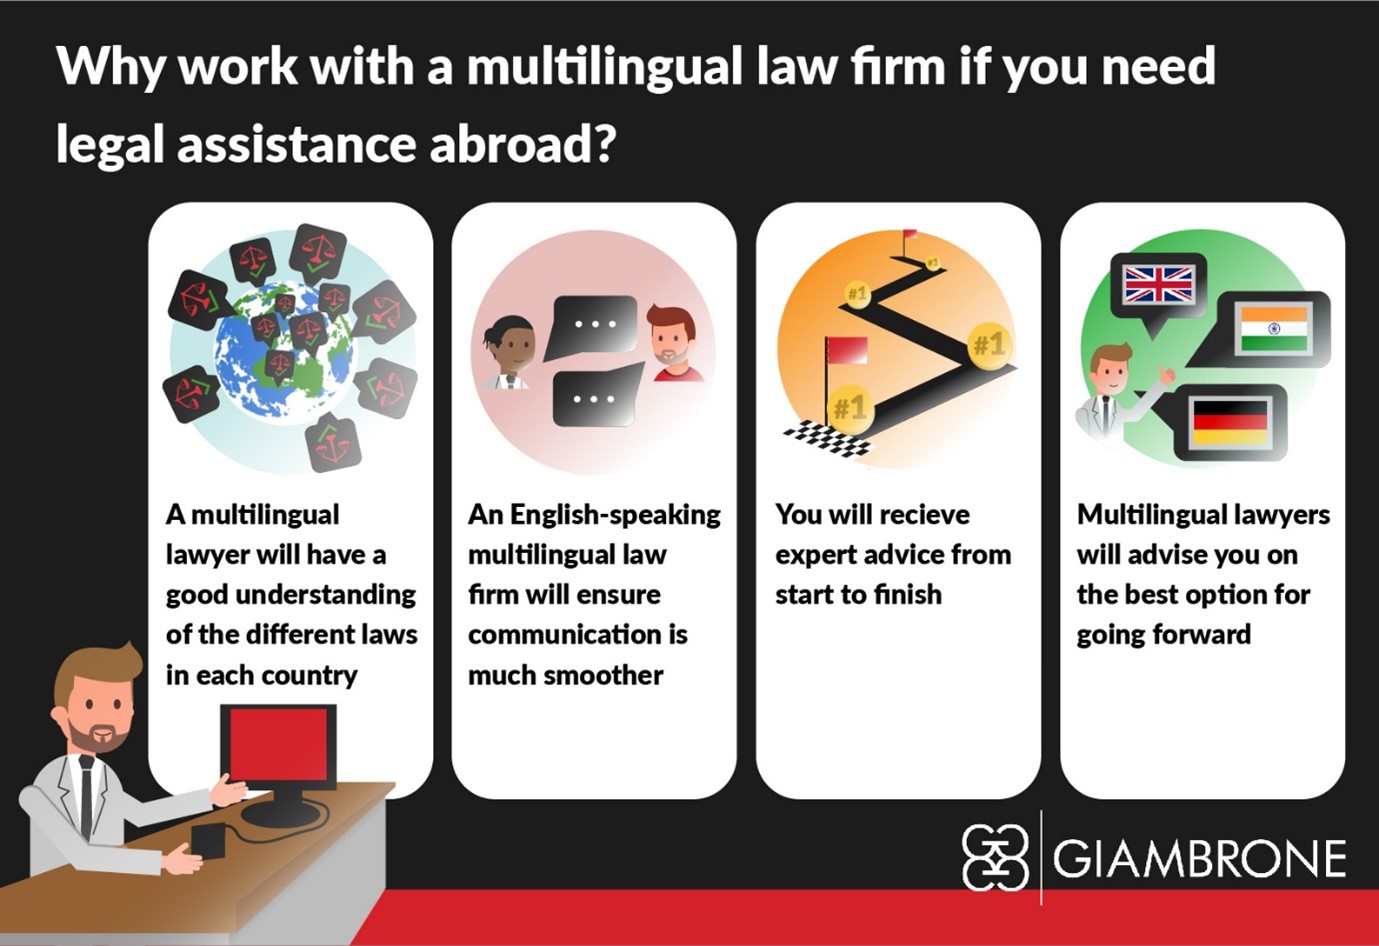  Infographil showing the benefits of a multilingual law firm if you need legal assistance abroard